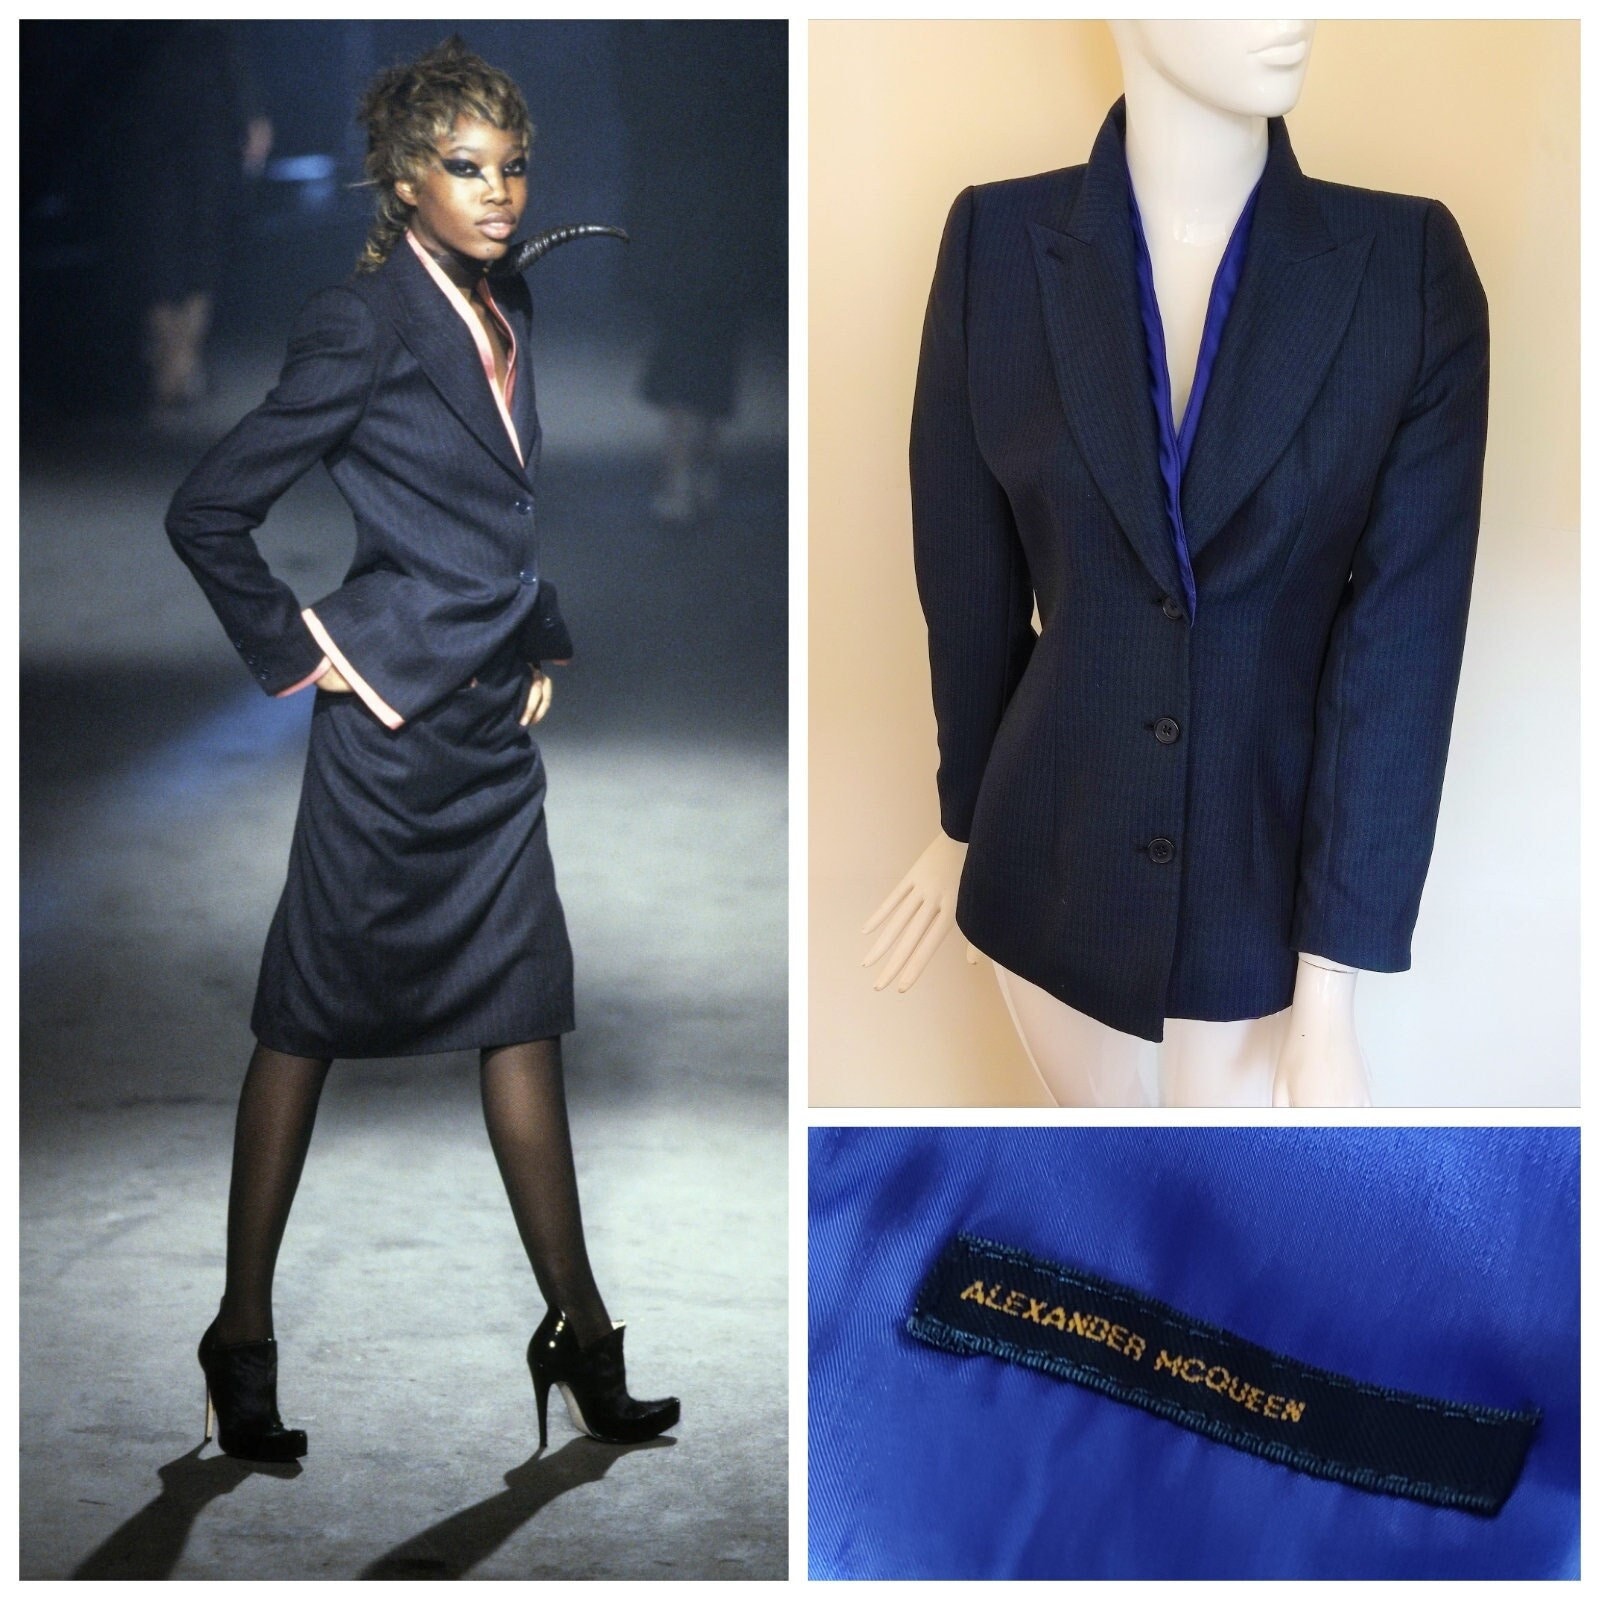 Documented & Rare Fall 2004 Alexander McQueen Tweed Pant Suit w